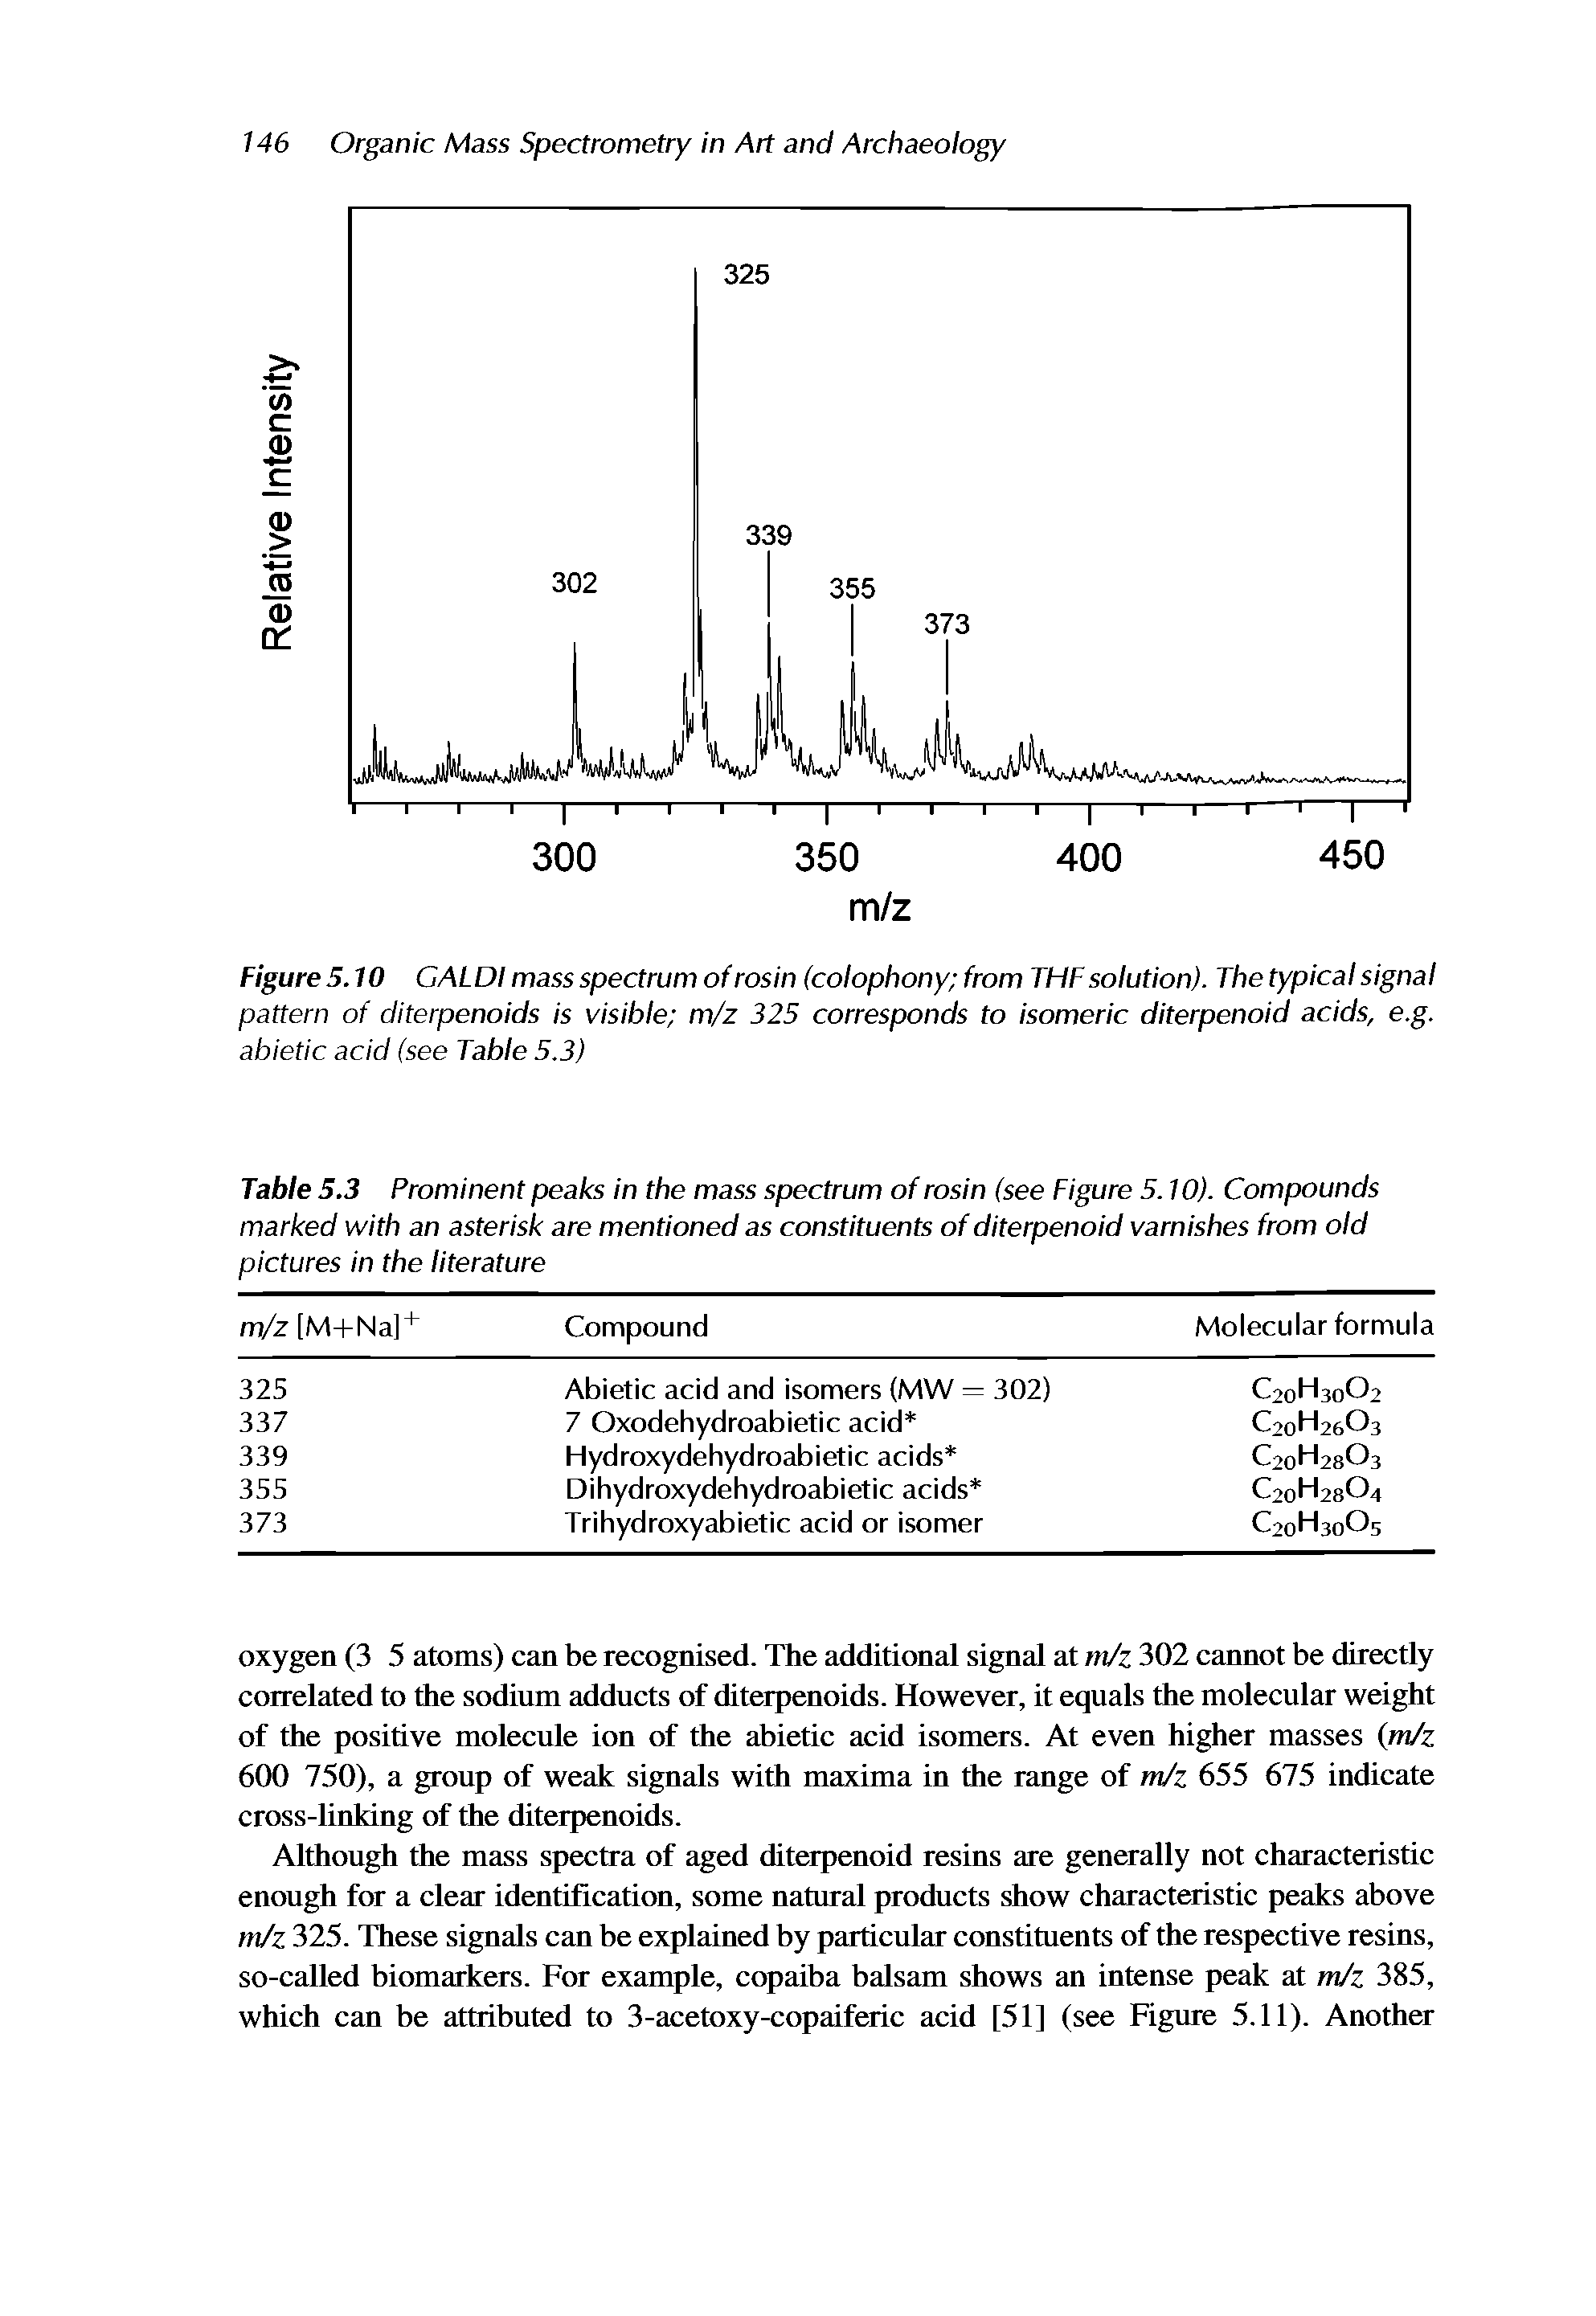 Figure 5.10 GALDI mass spectrum of rosin (colophony from THF solution). The typical signal pattern of diterpenoids is visible m/z 325 corresponds to isomeric diterpenoid acids, e.g.